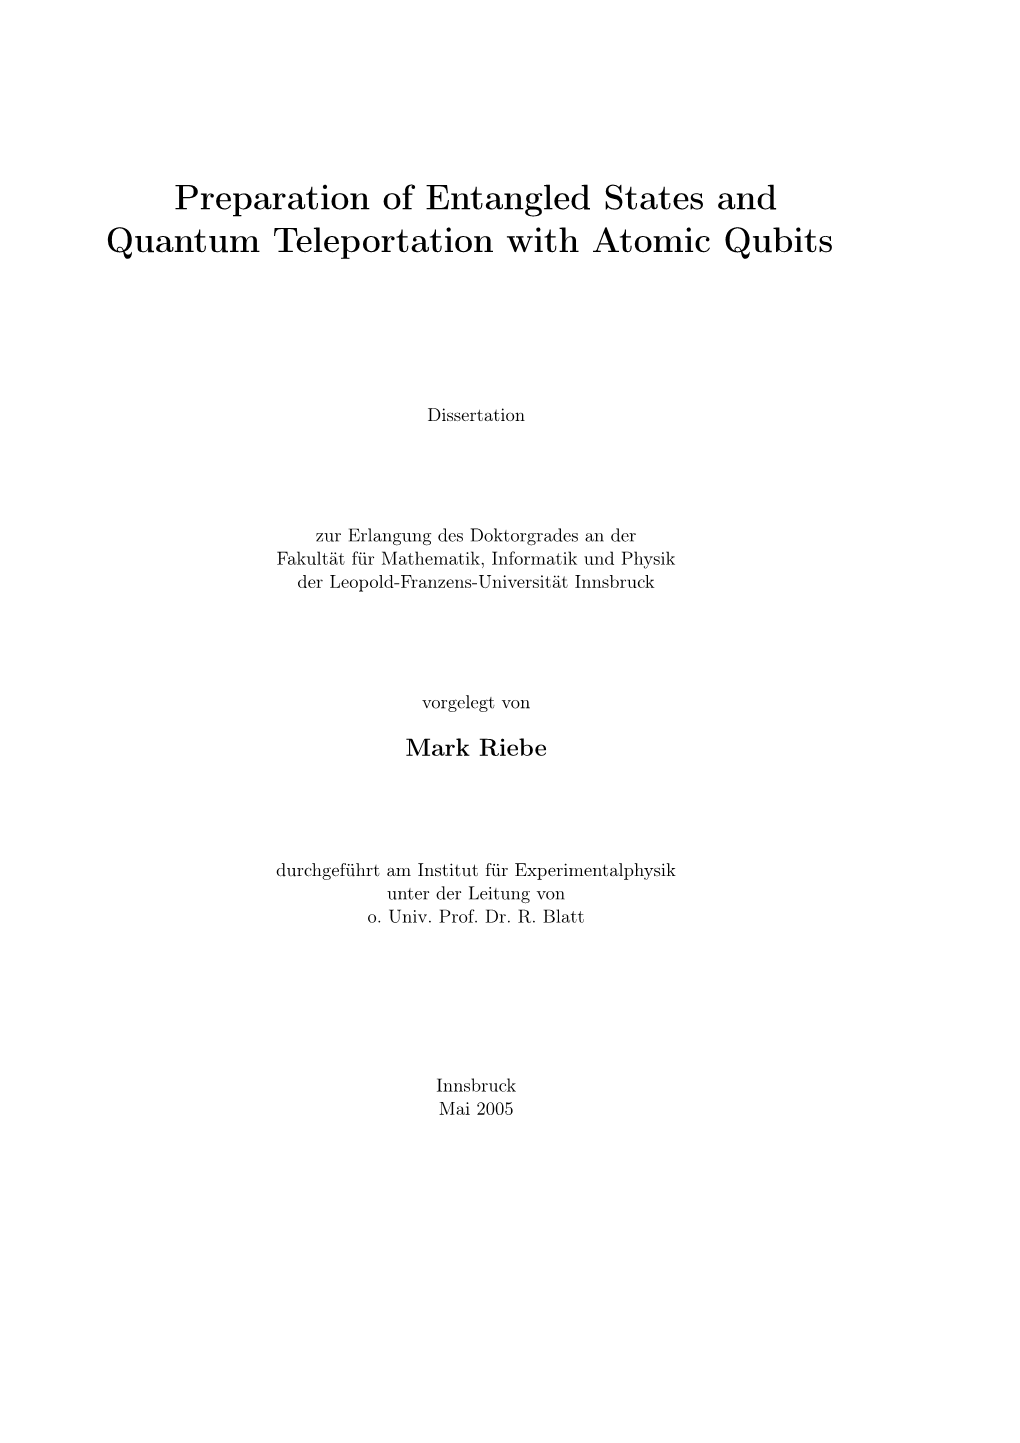 Preparation of Entangled States and Quantum Teleportation with Atomic Qubits